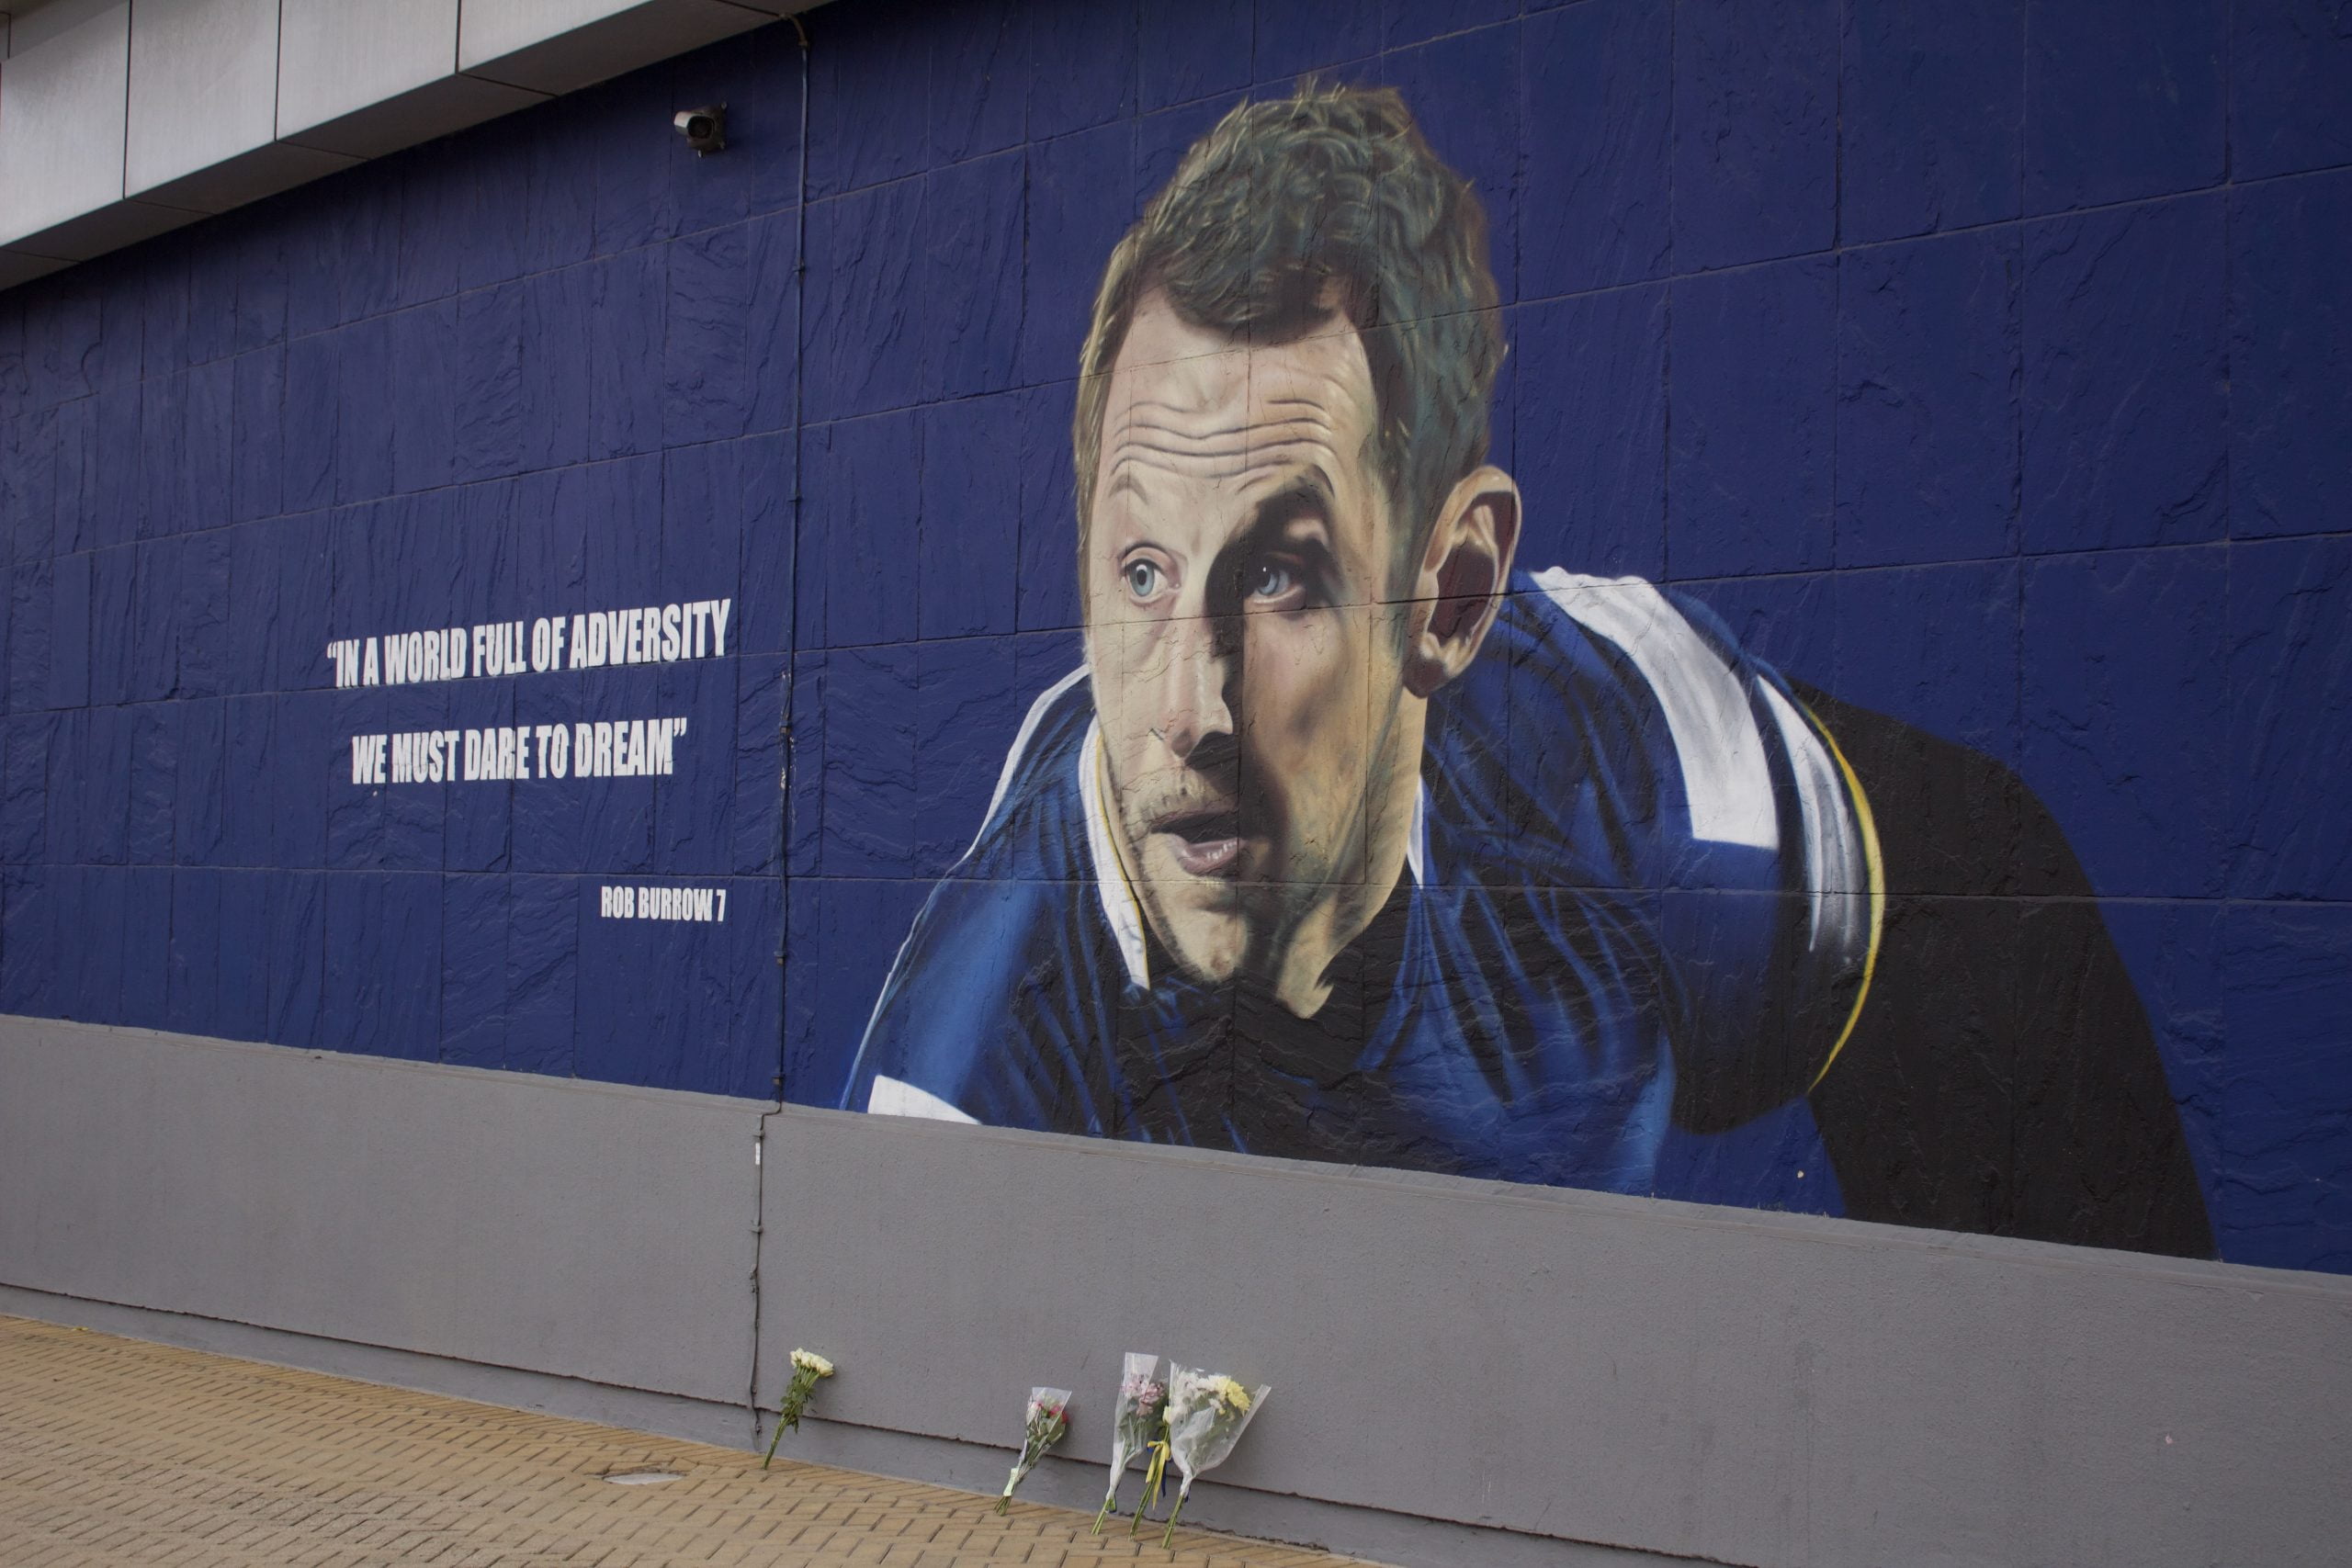 Rob Burrow mural on the side of a wall. The text reads "in a world full of adversity, we must dare to dream" - Rob Burrow